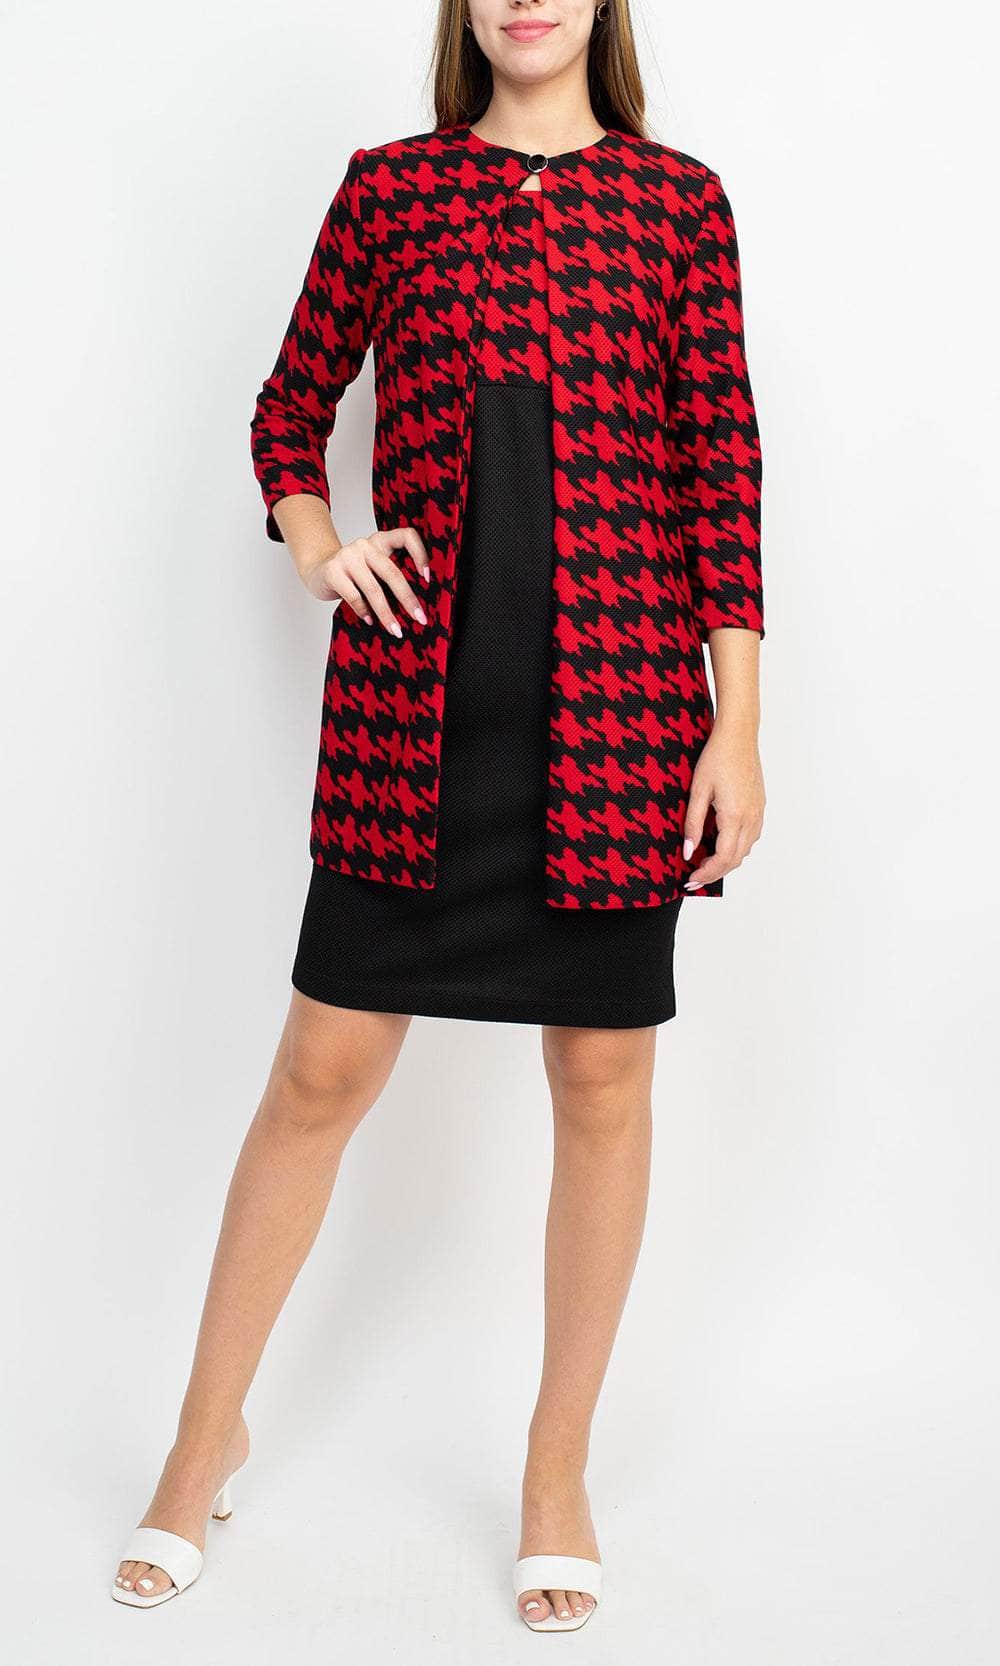 Danny & Nicole 27140M - Checkered Dress with Jacket
